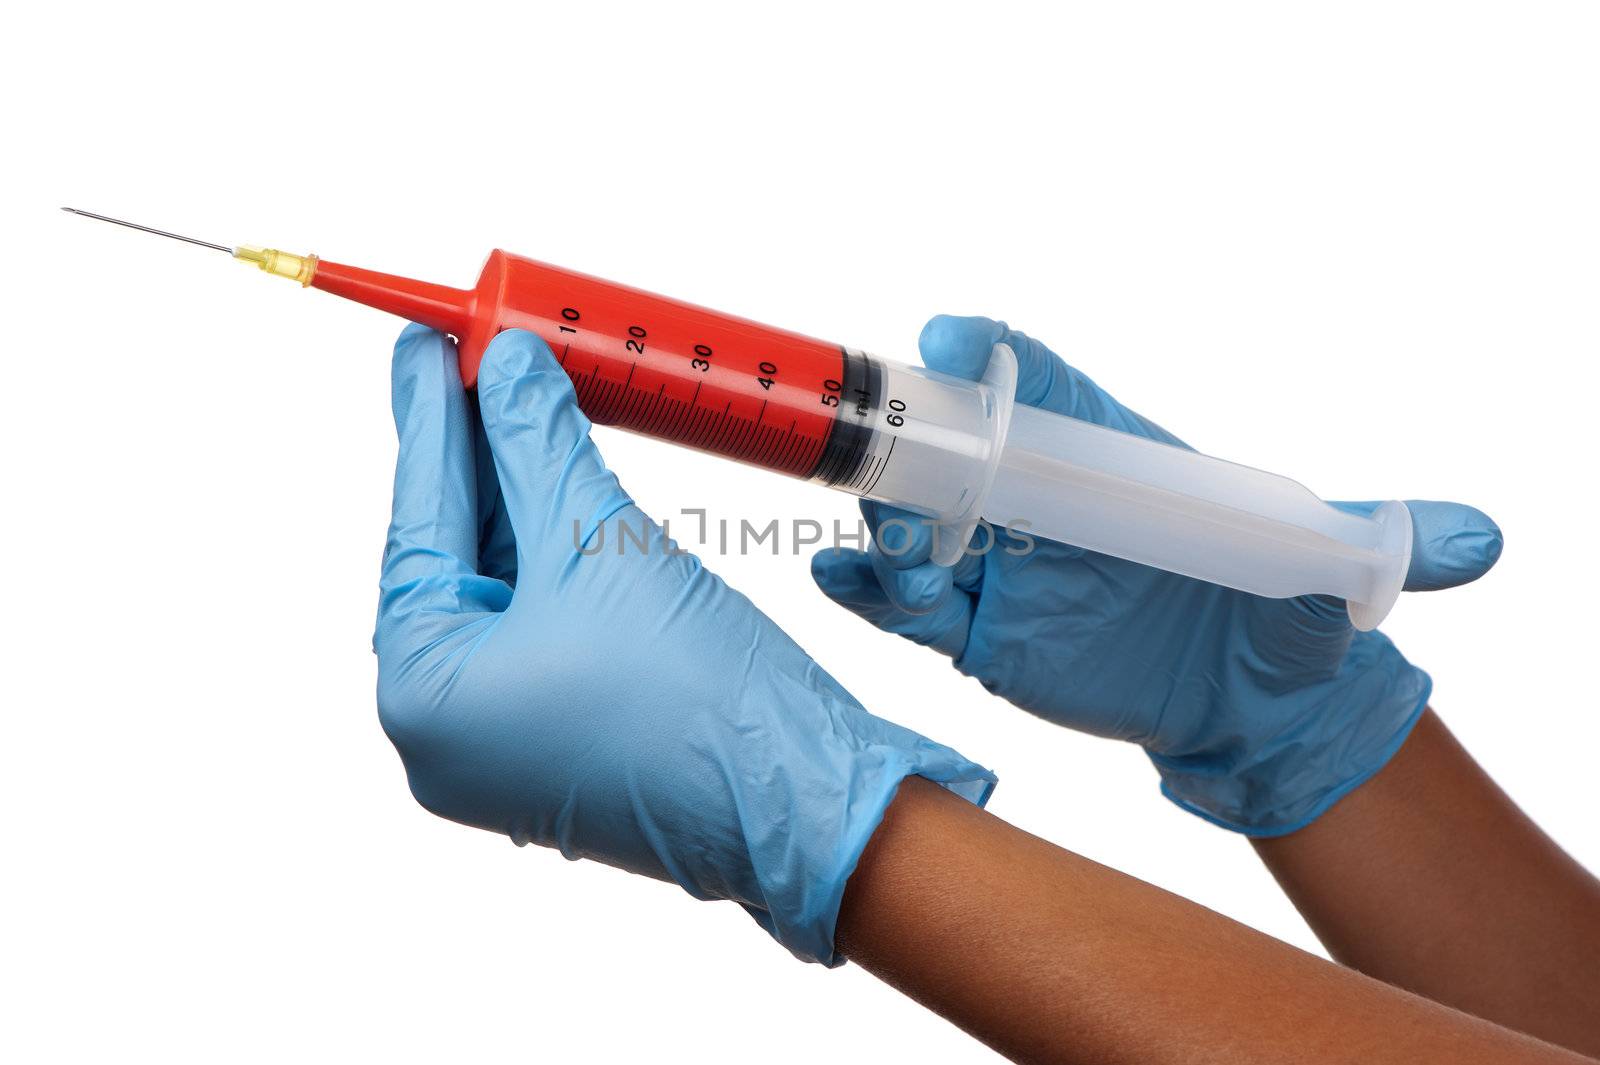 Two gloved hands hold a large injection syringe filled with a red substance.